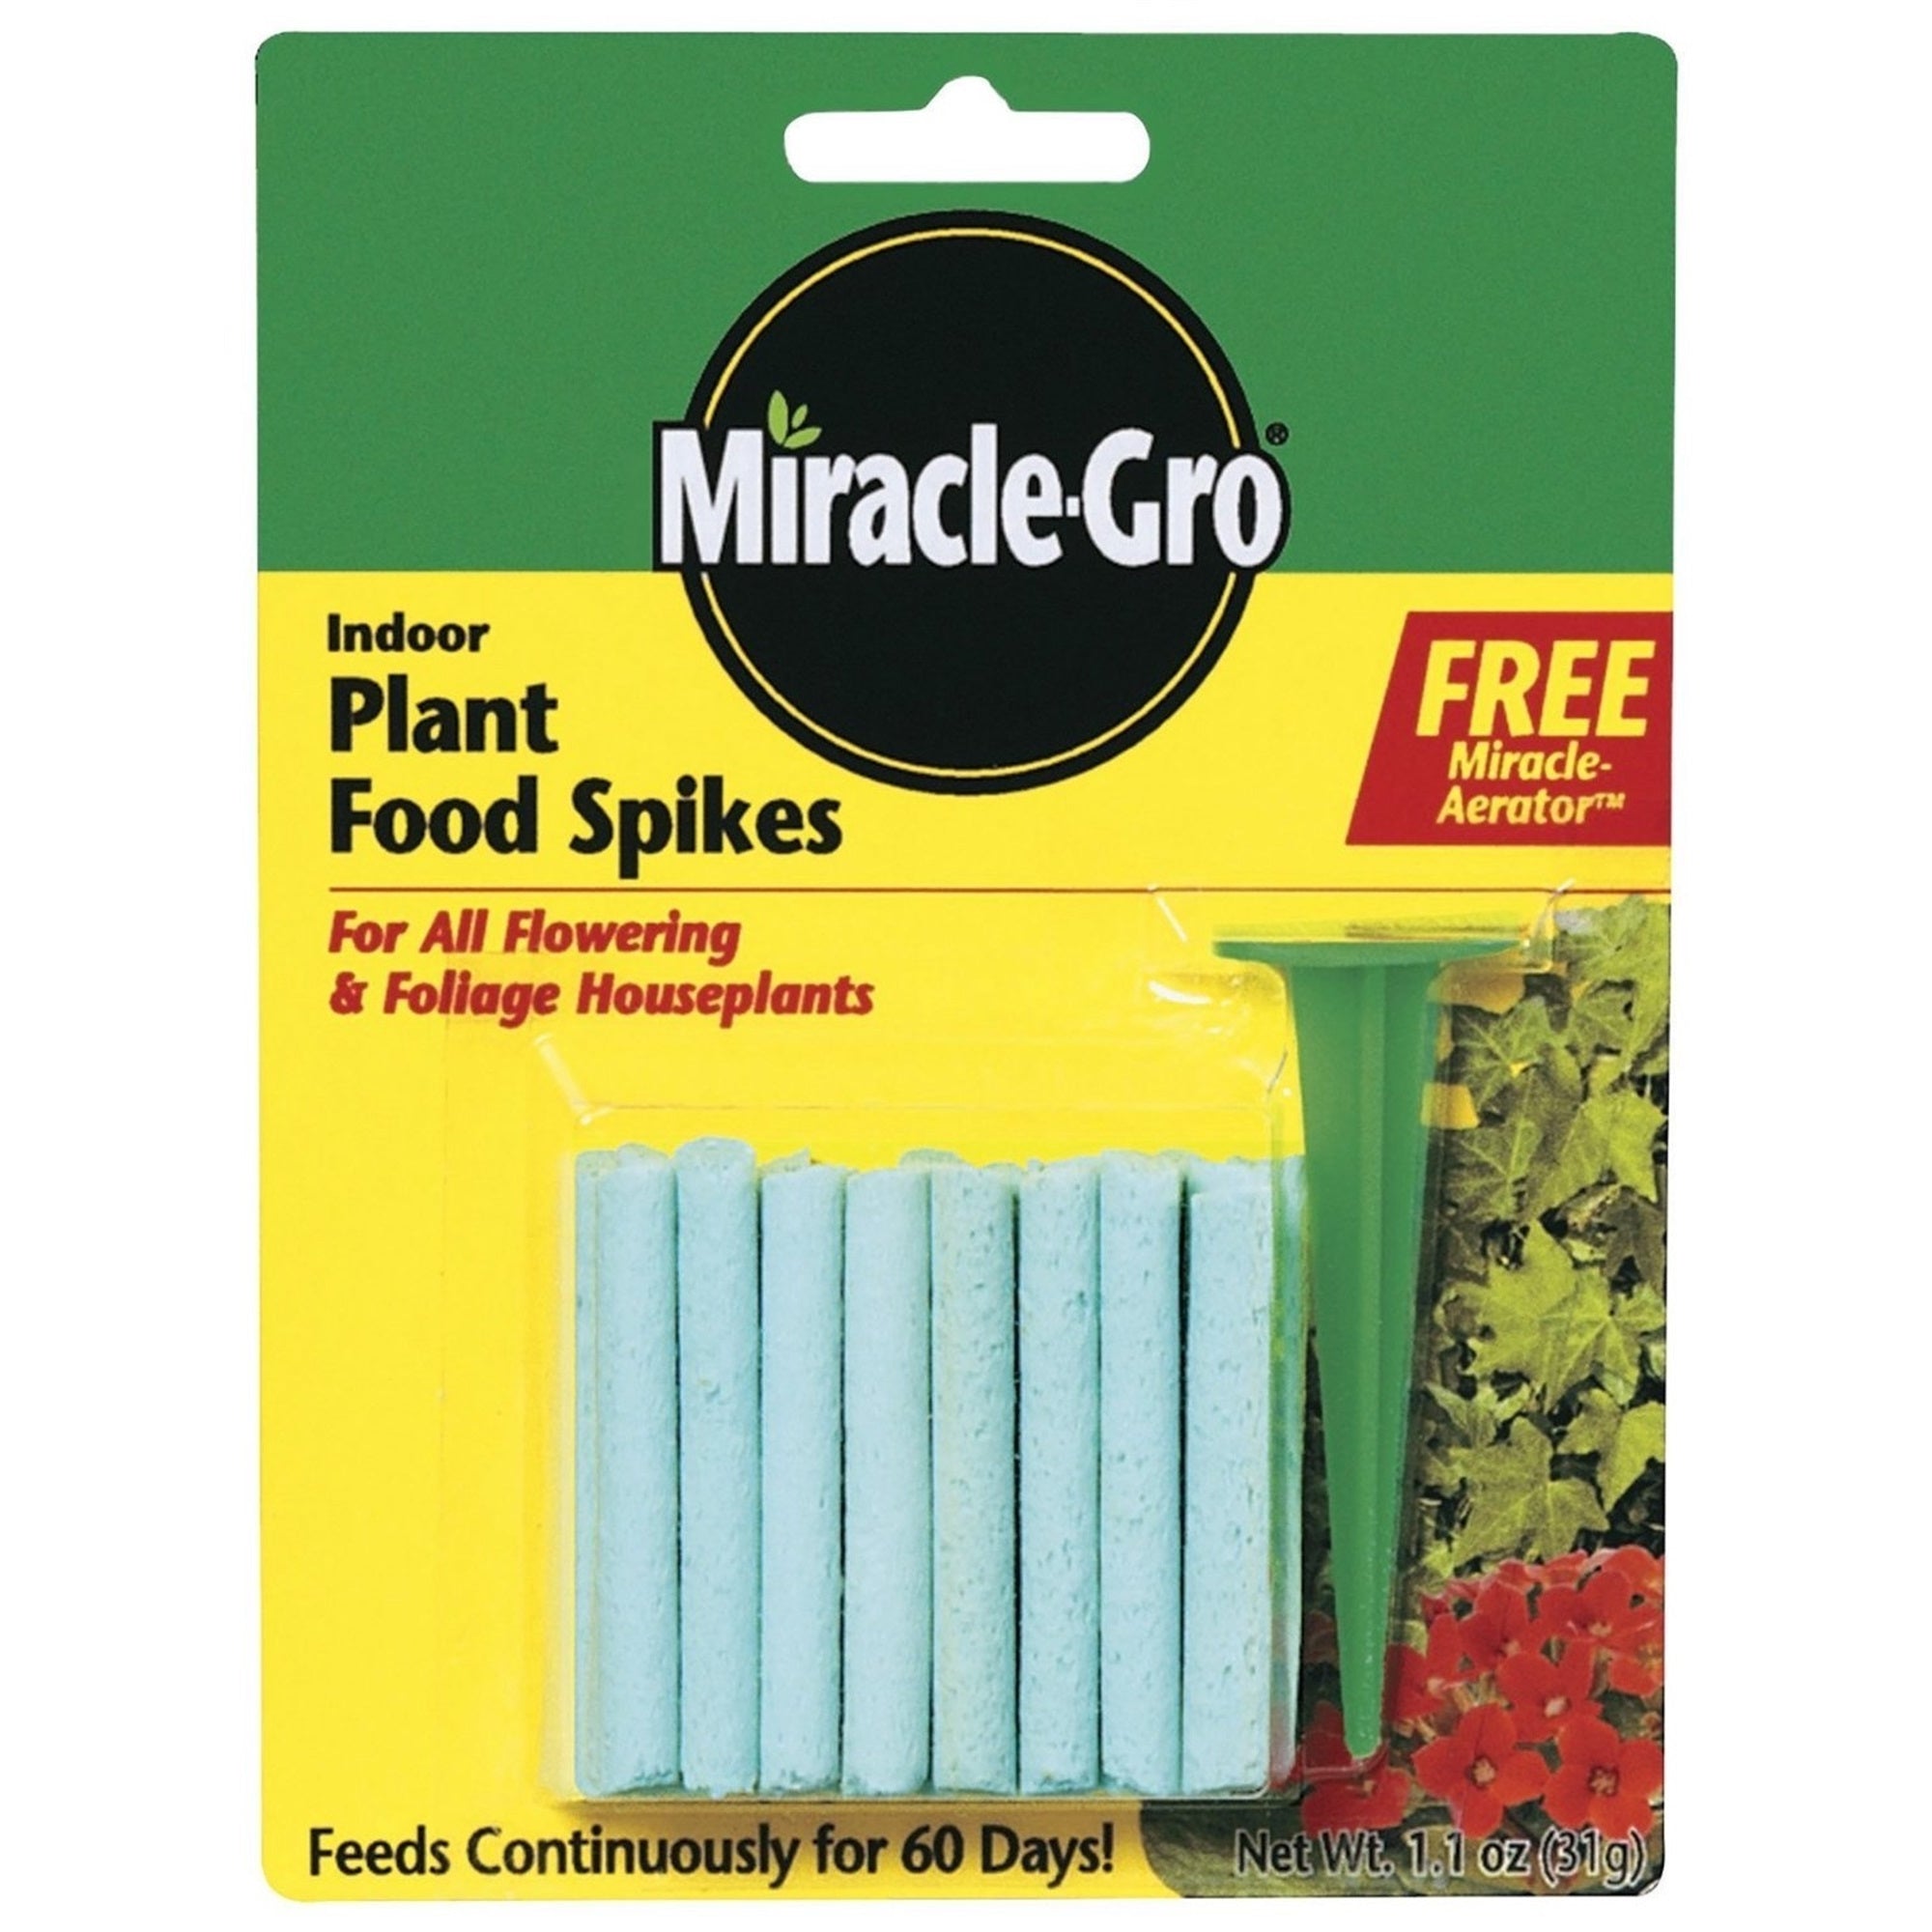 Miracle-Gro Indoor Plant Food Spikes, Pack of 24